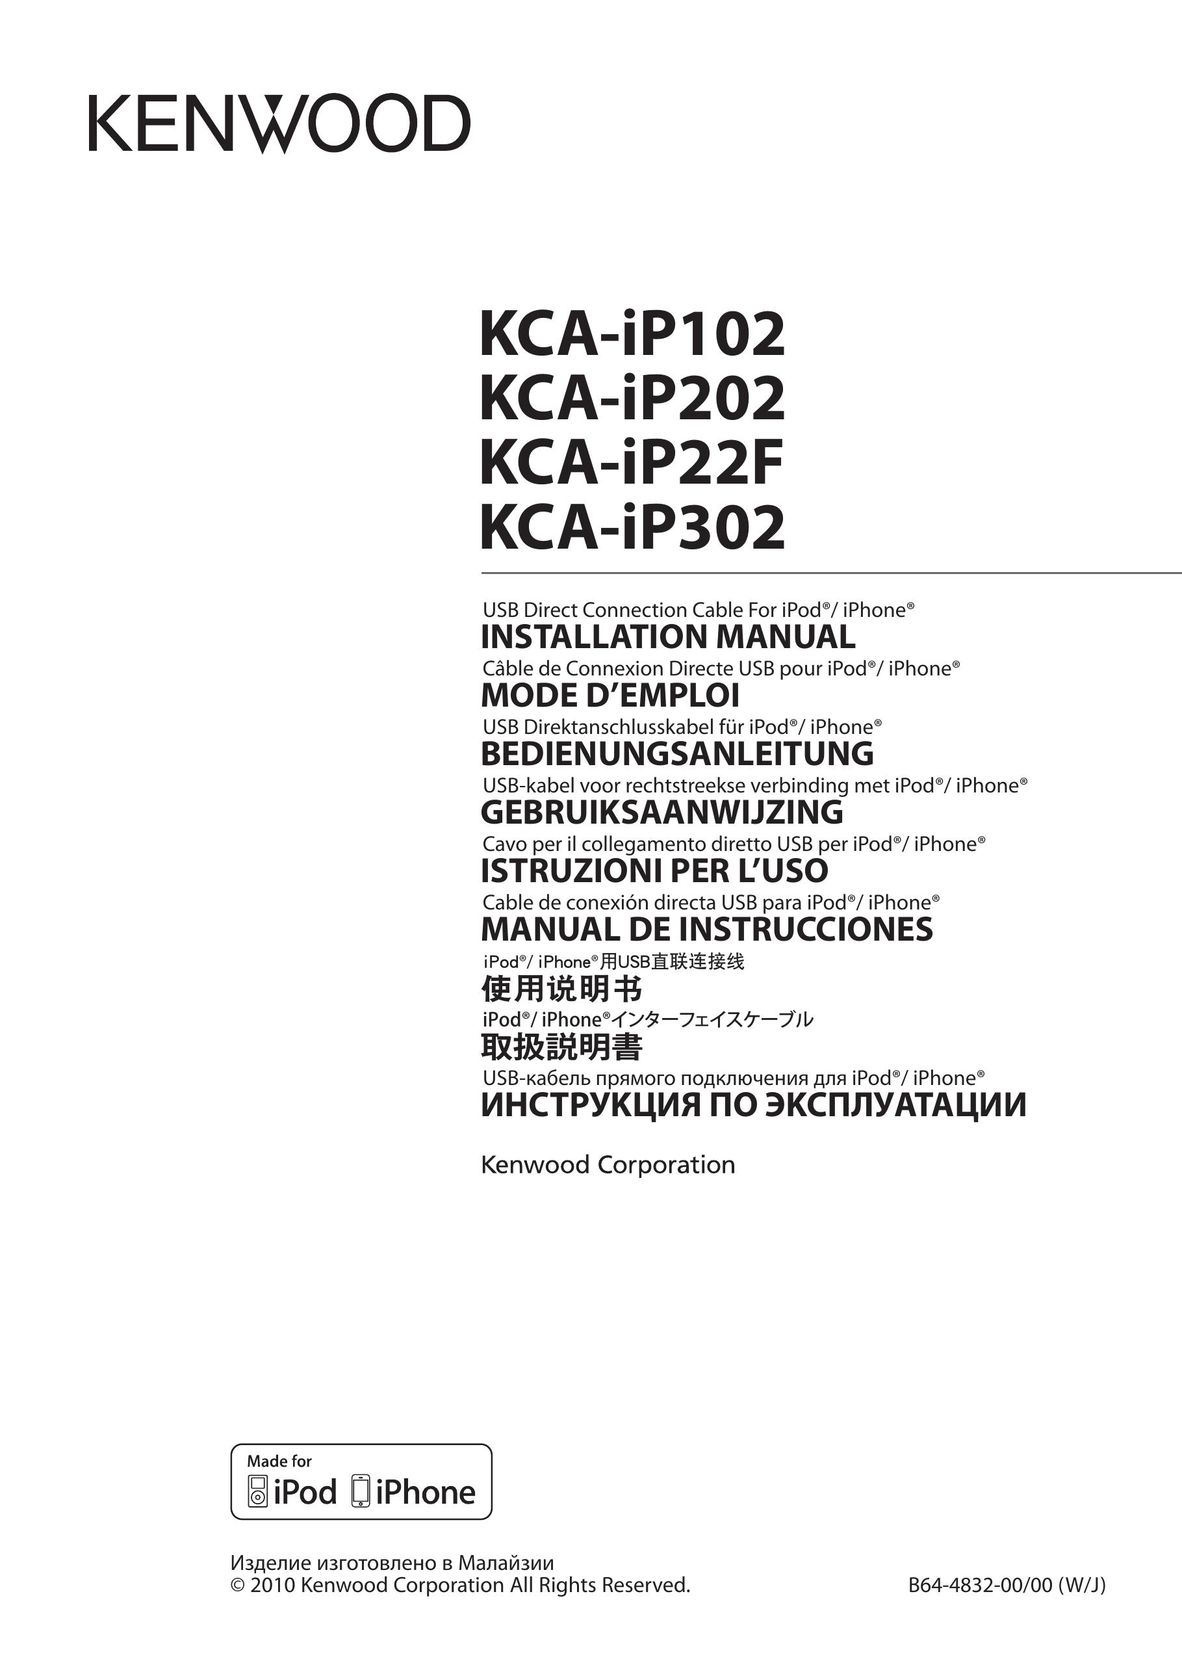 Kenwood KCA-iP22F Network Cables User Manual